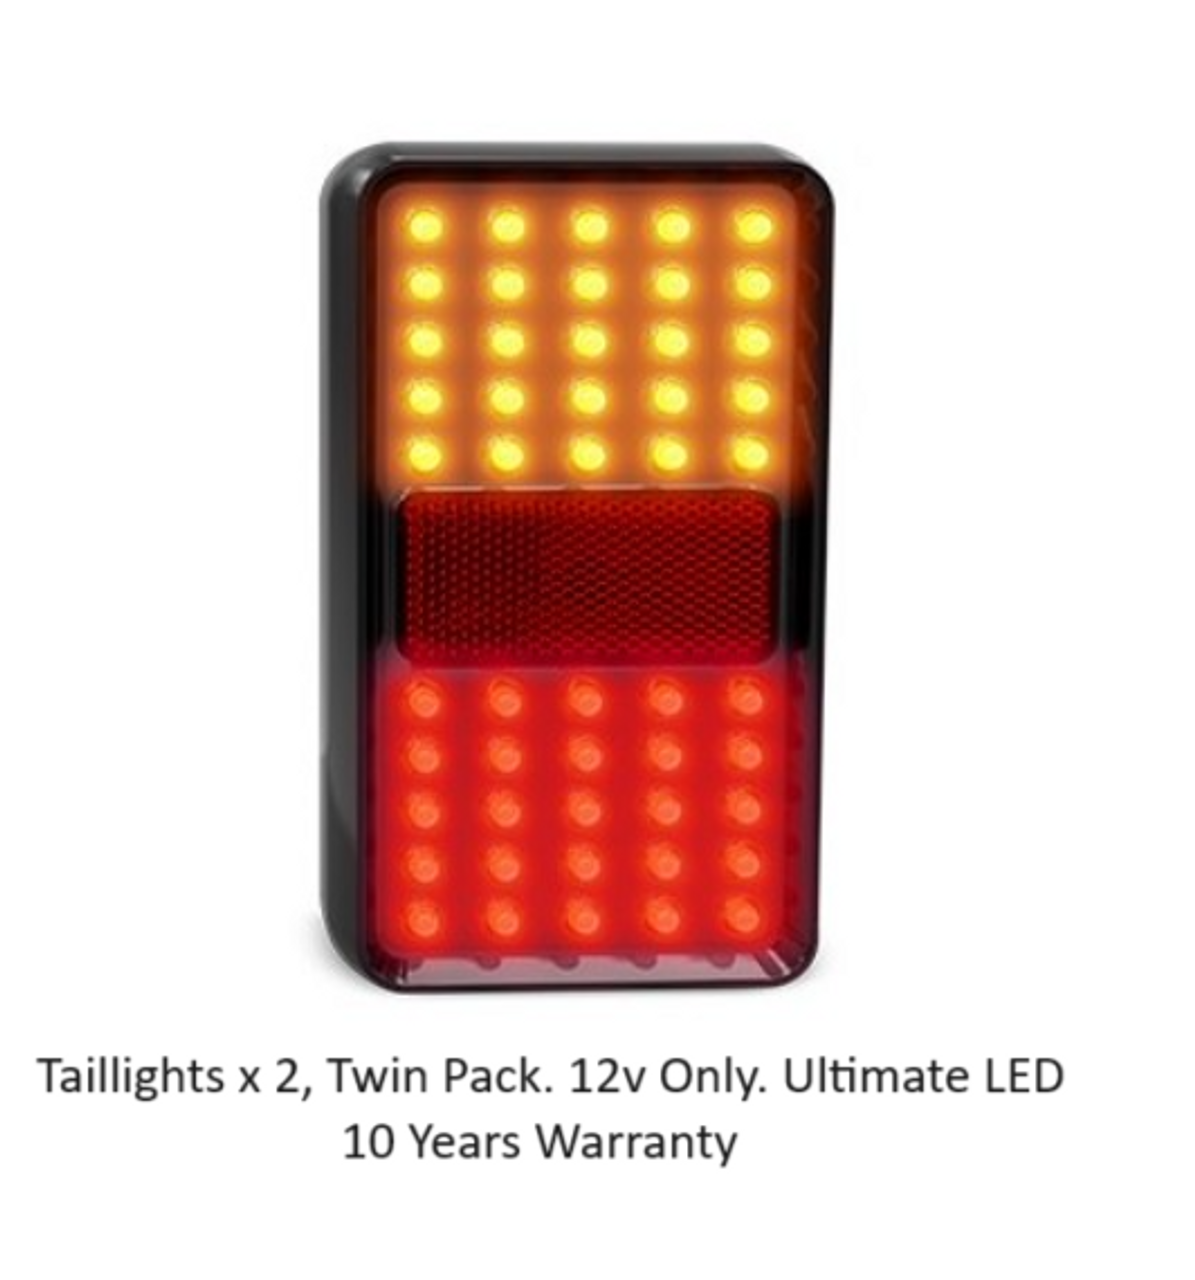 A212BAR2  Submersible Stop, Tail, Indicator Lamps 12v Twin Pack. Ultimate LED. 